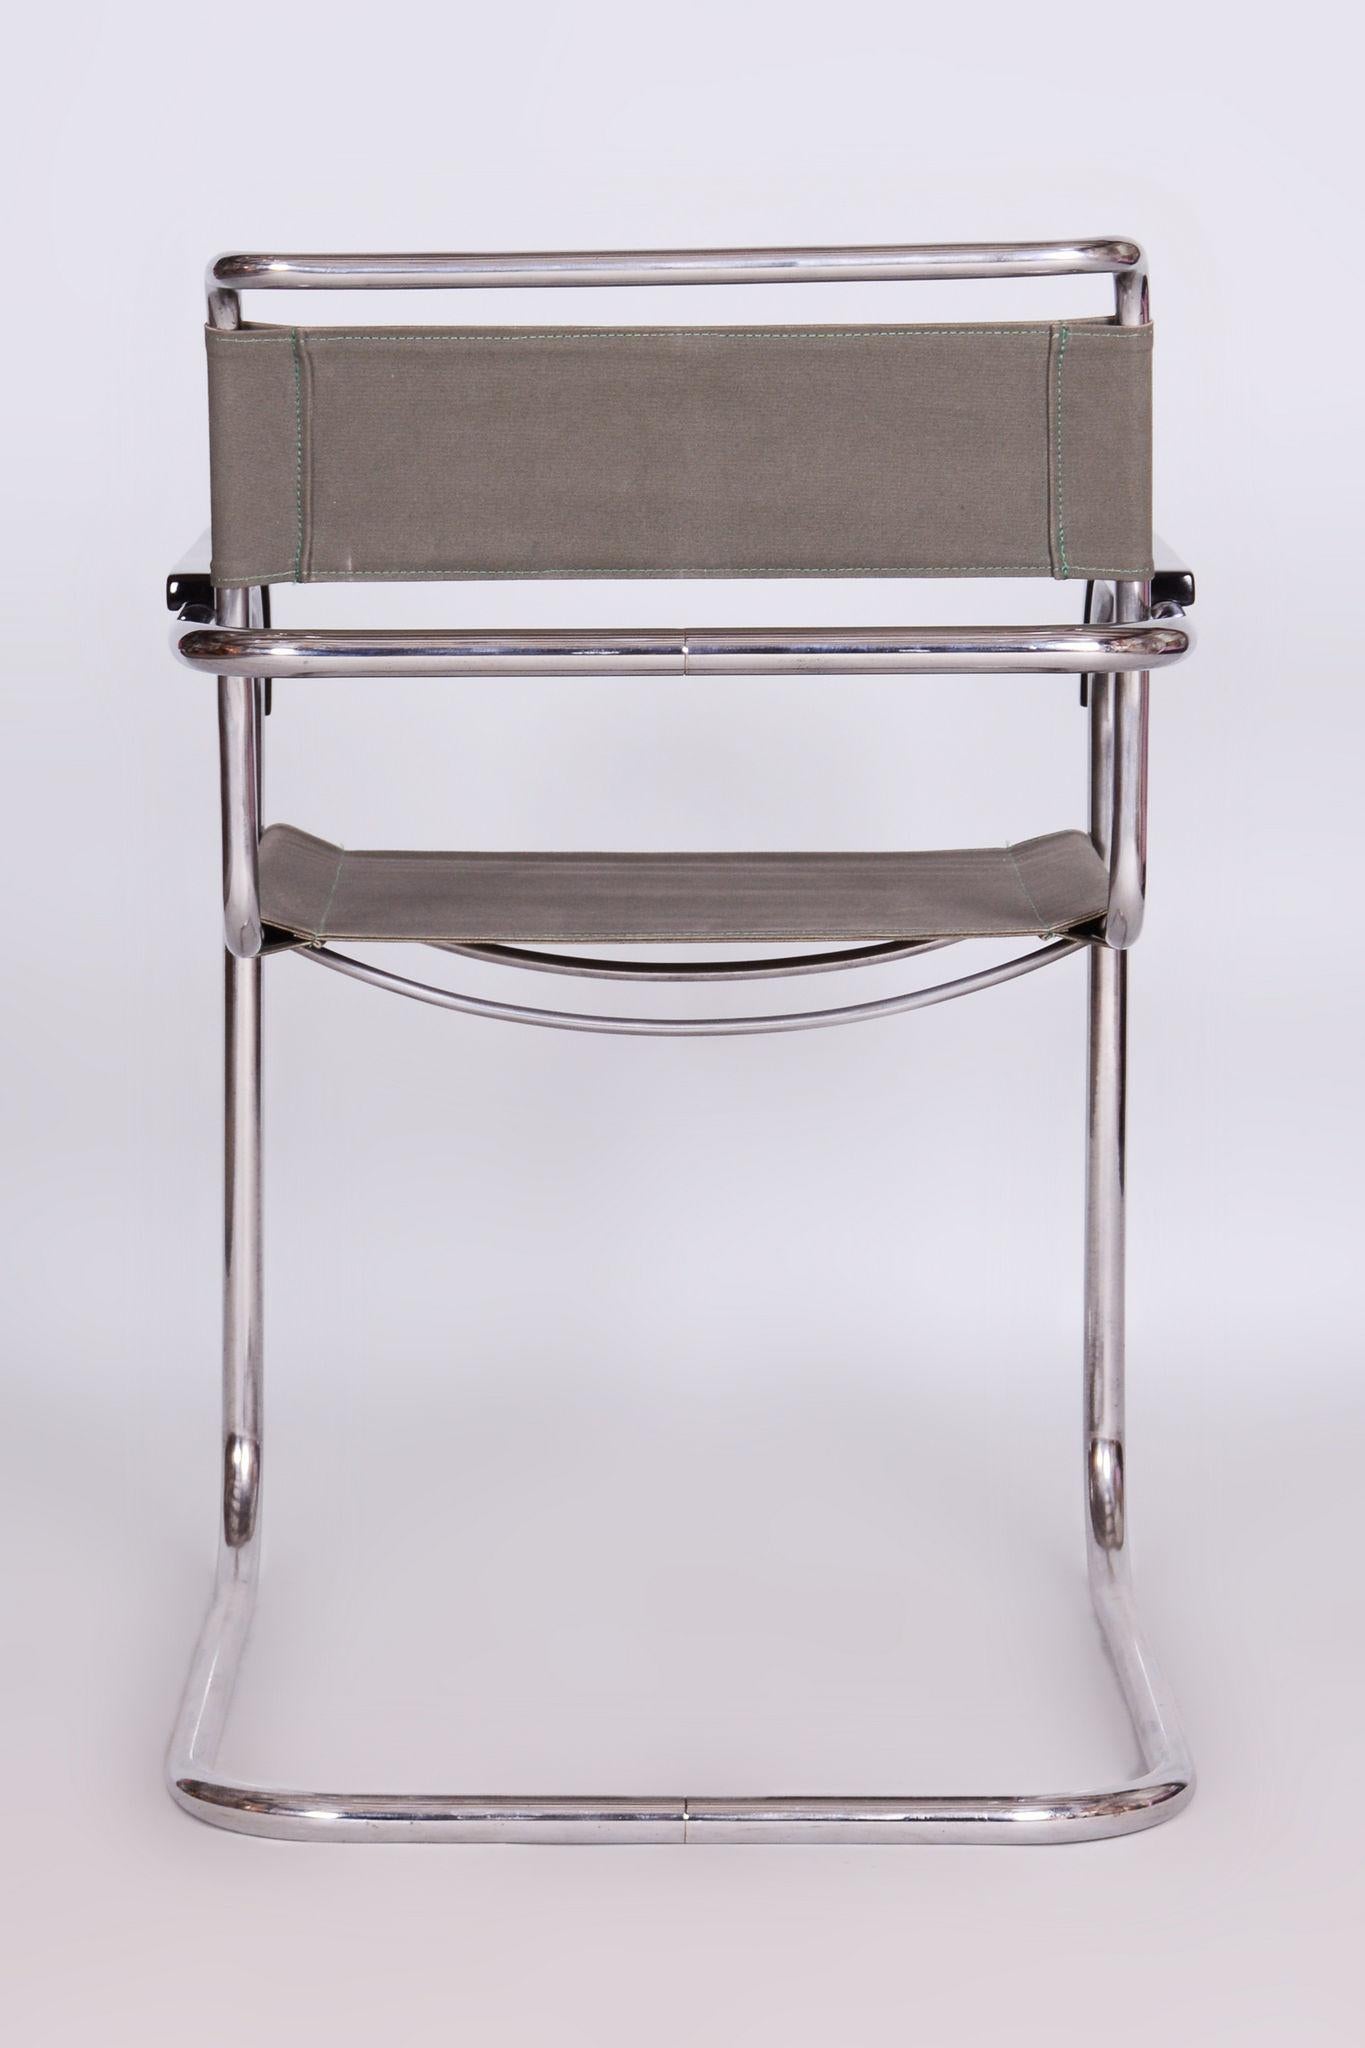 Restored Bauhaus Armchair Designed By Marcel Breuer and Made By Thonet.

Designer: Marcel Breuer
Maker: Thonet
Material: Chrome-plated Steel, Iron-garn Fabric
Source: Czechia (Czechoslovakia)
Period: 1930-1939

Designed by world-renowned German